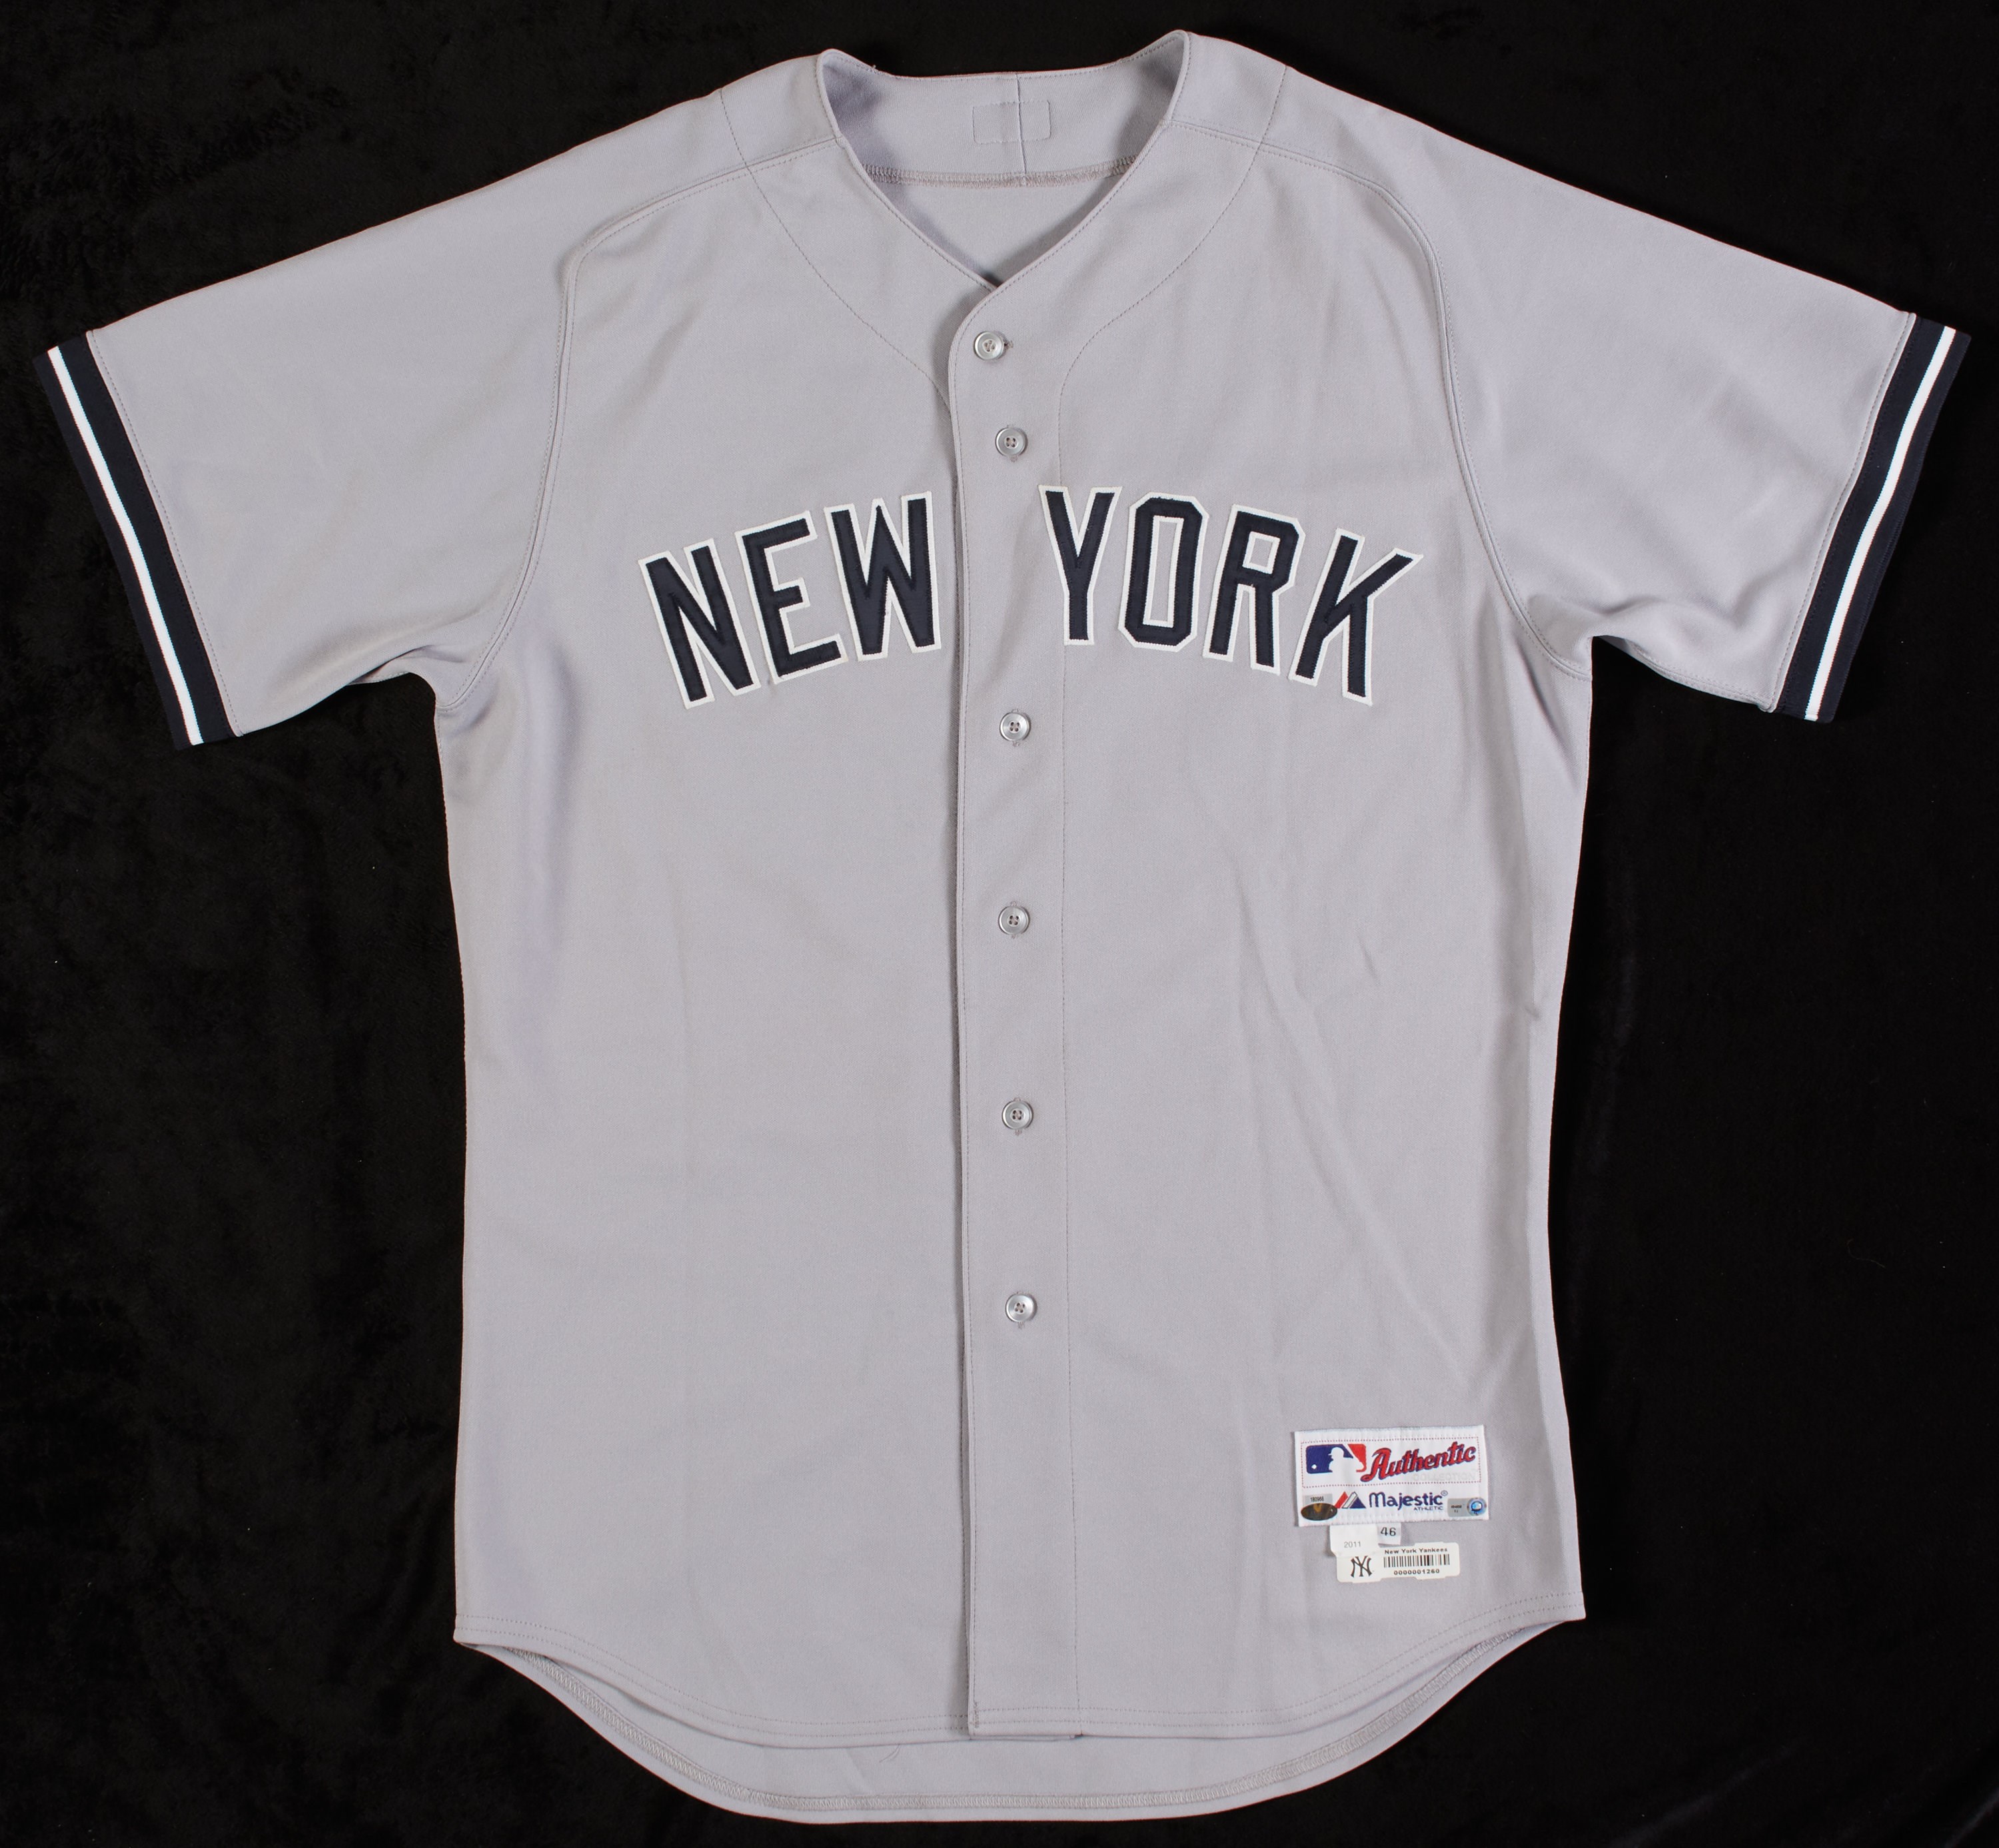 - 2011 Curtis Granderson Yankees Game Worn Jersey from Mariano Rivera's 600th Save (MLB Holo, Steiner & Photo-Matched)